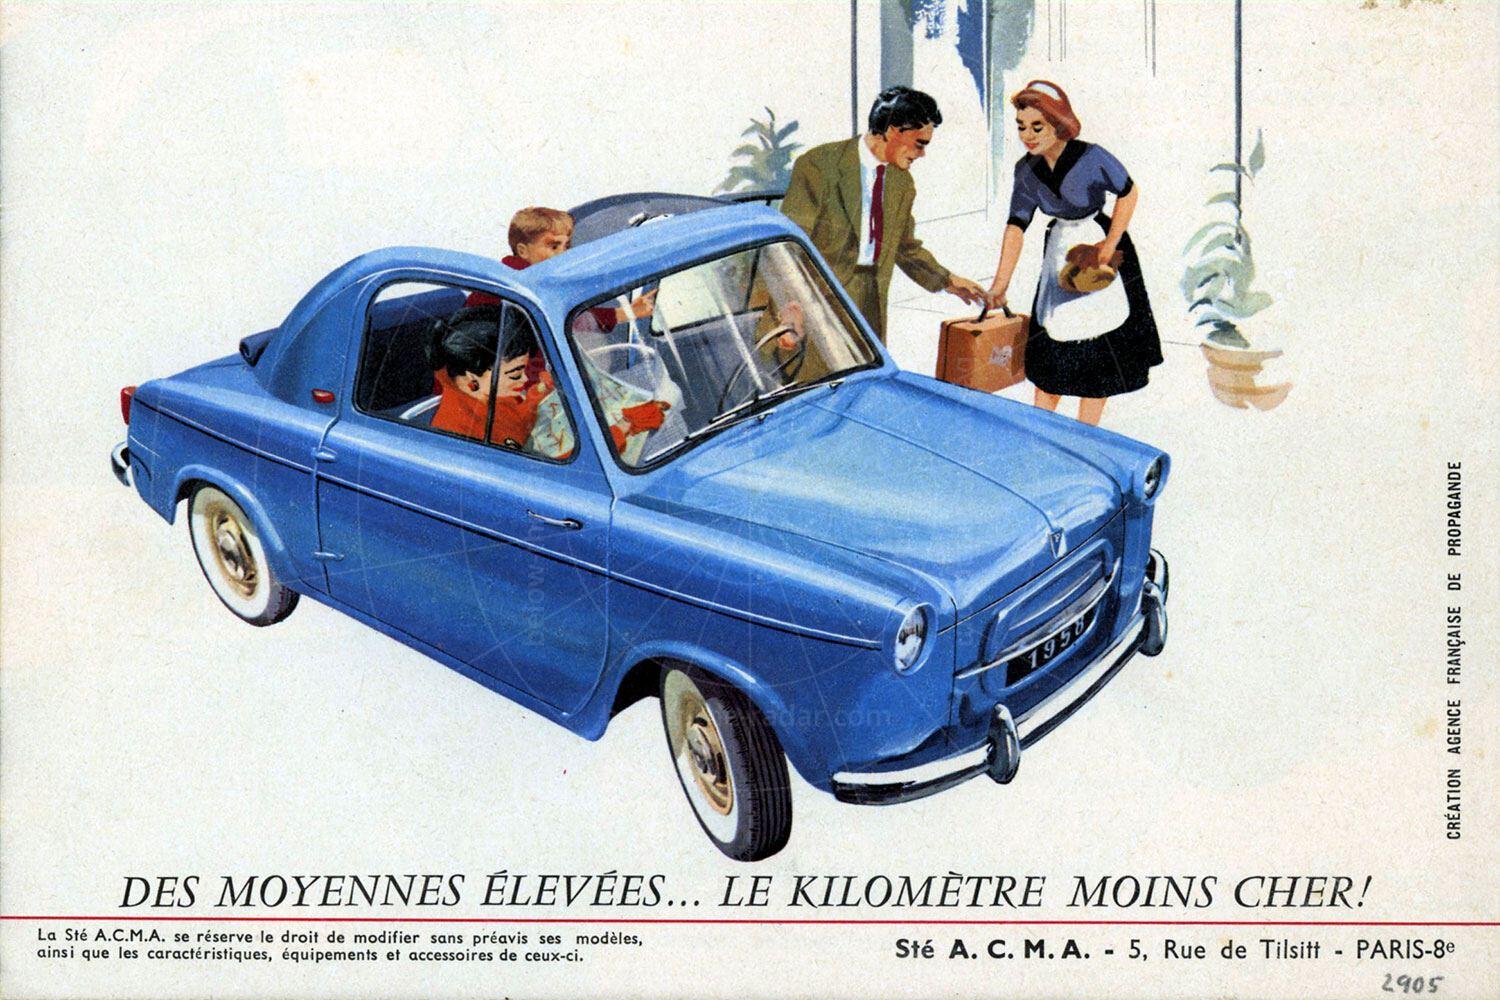 The story of the Vespa 400 microcar on Below The Radar